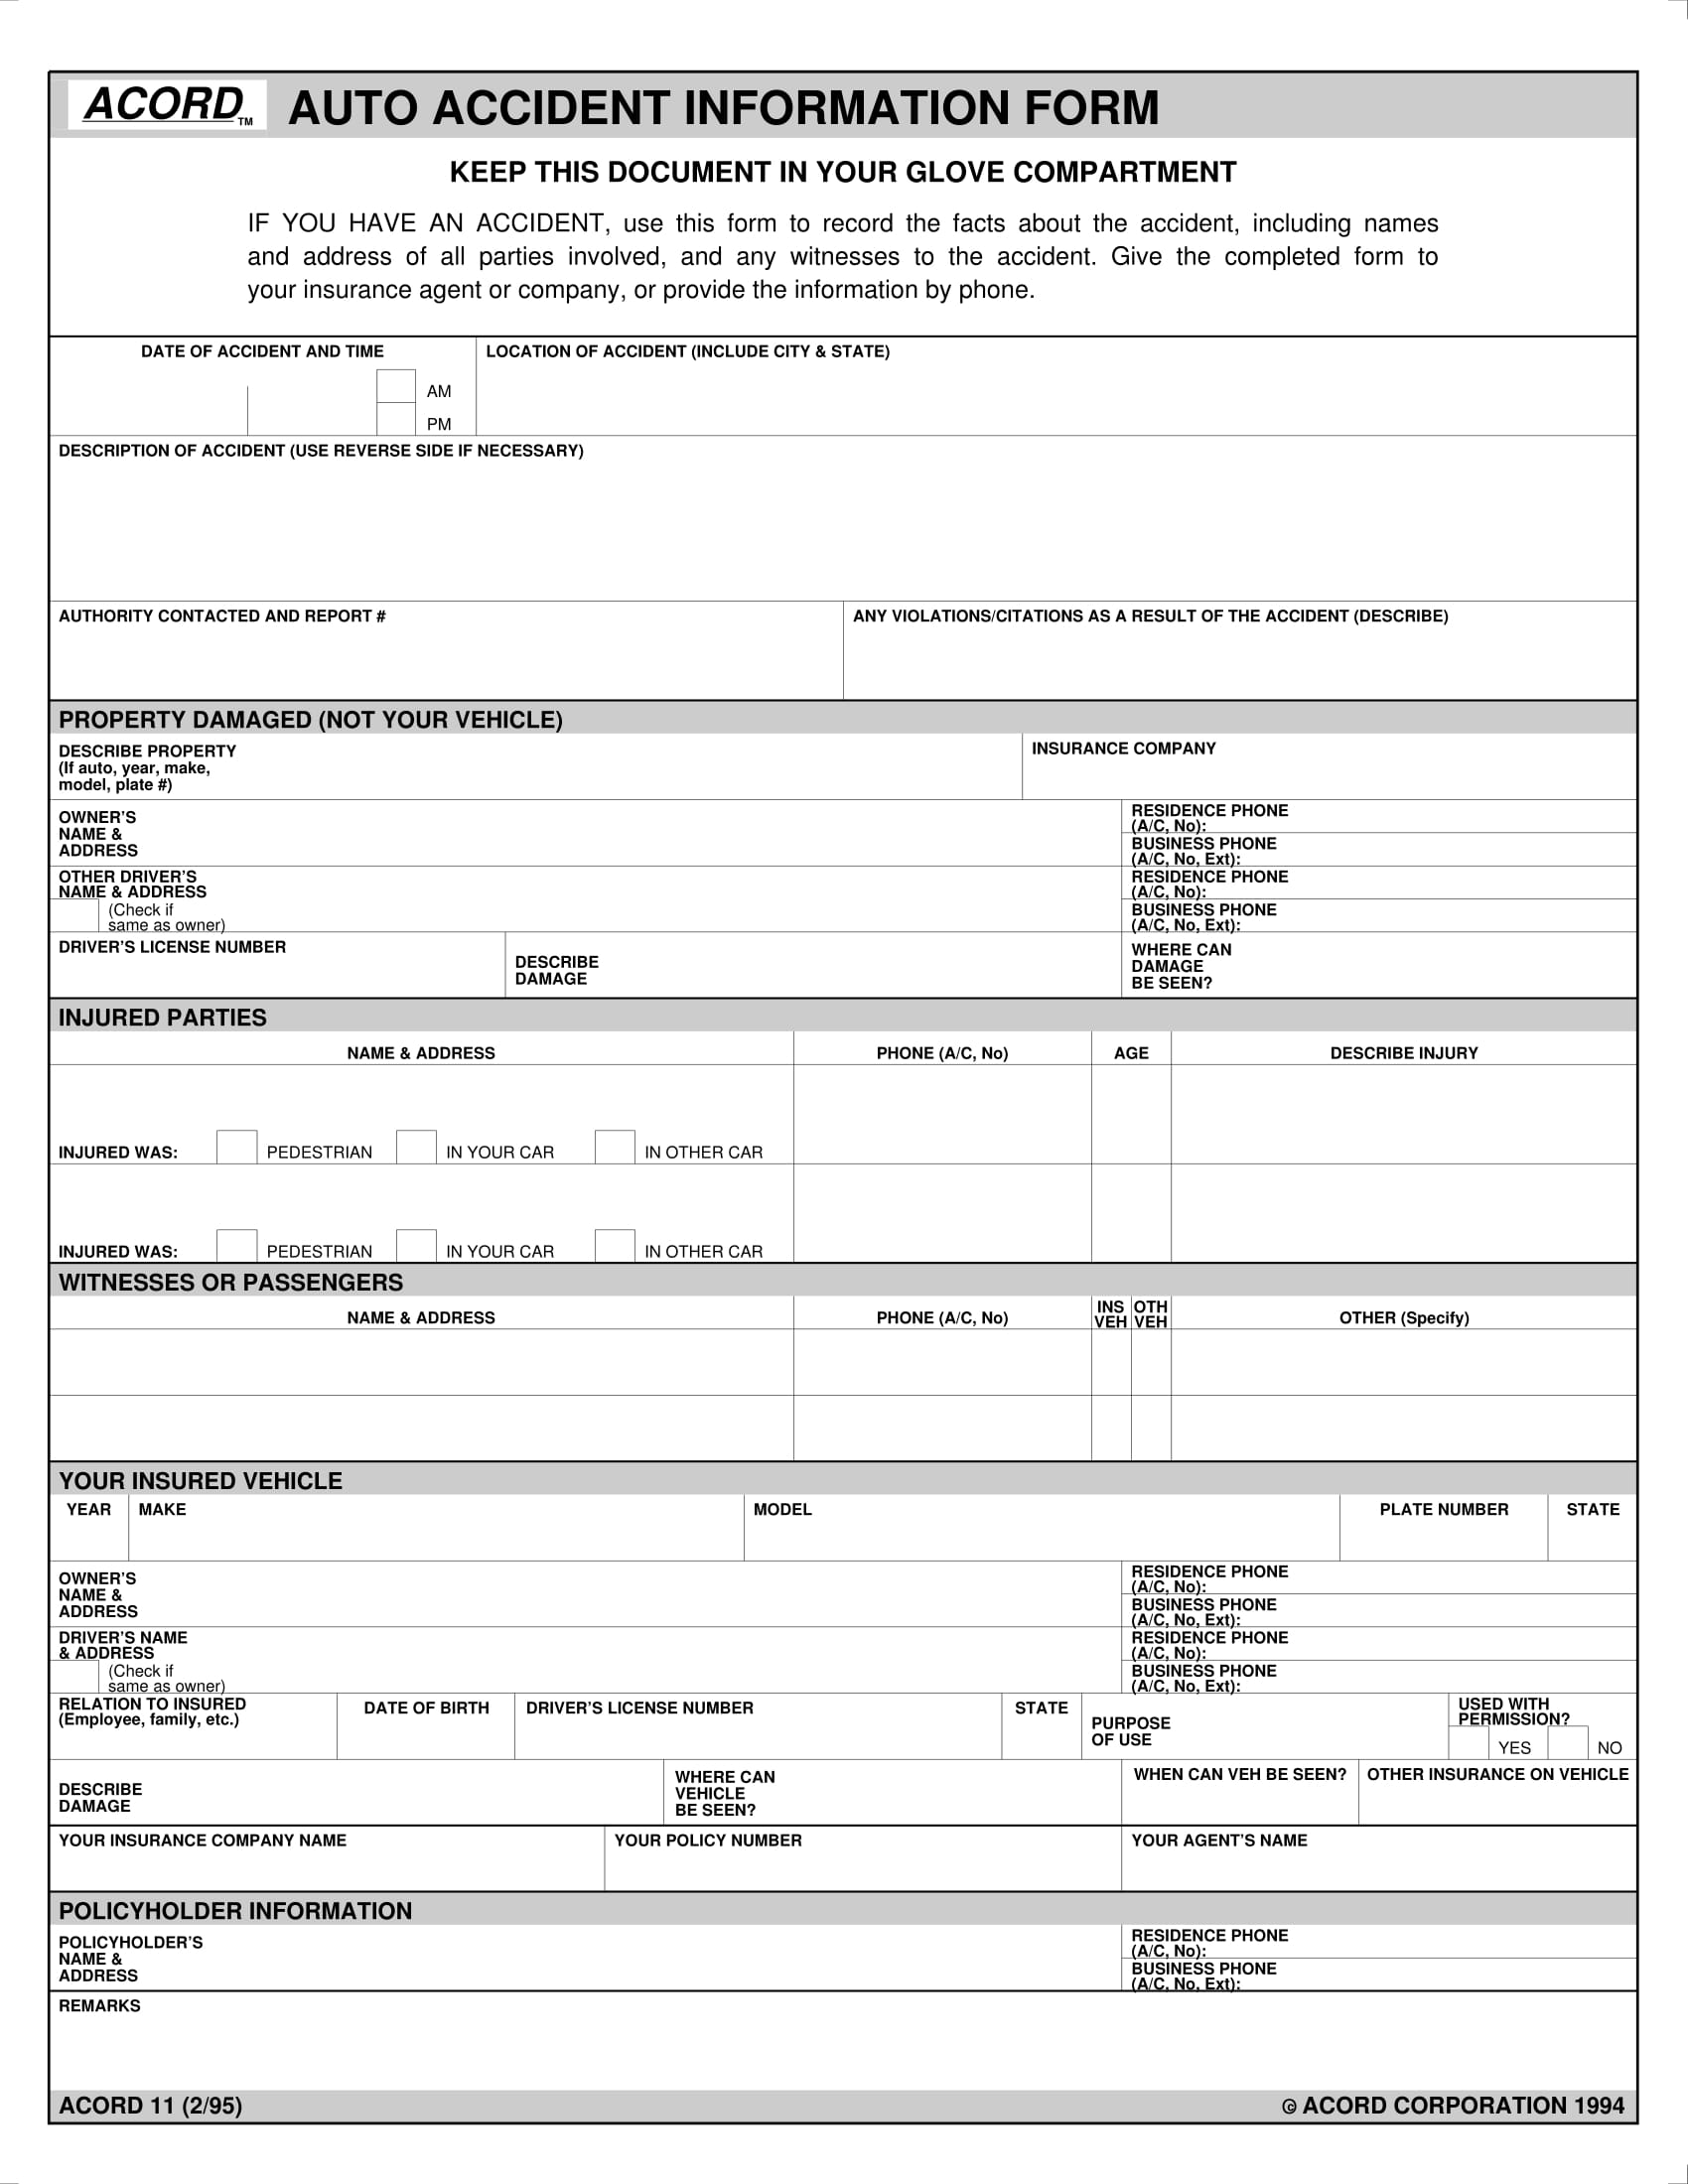 auto accident information form 1